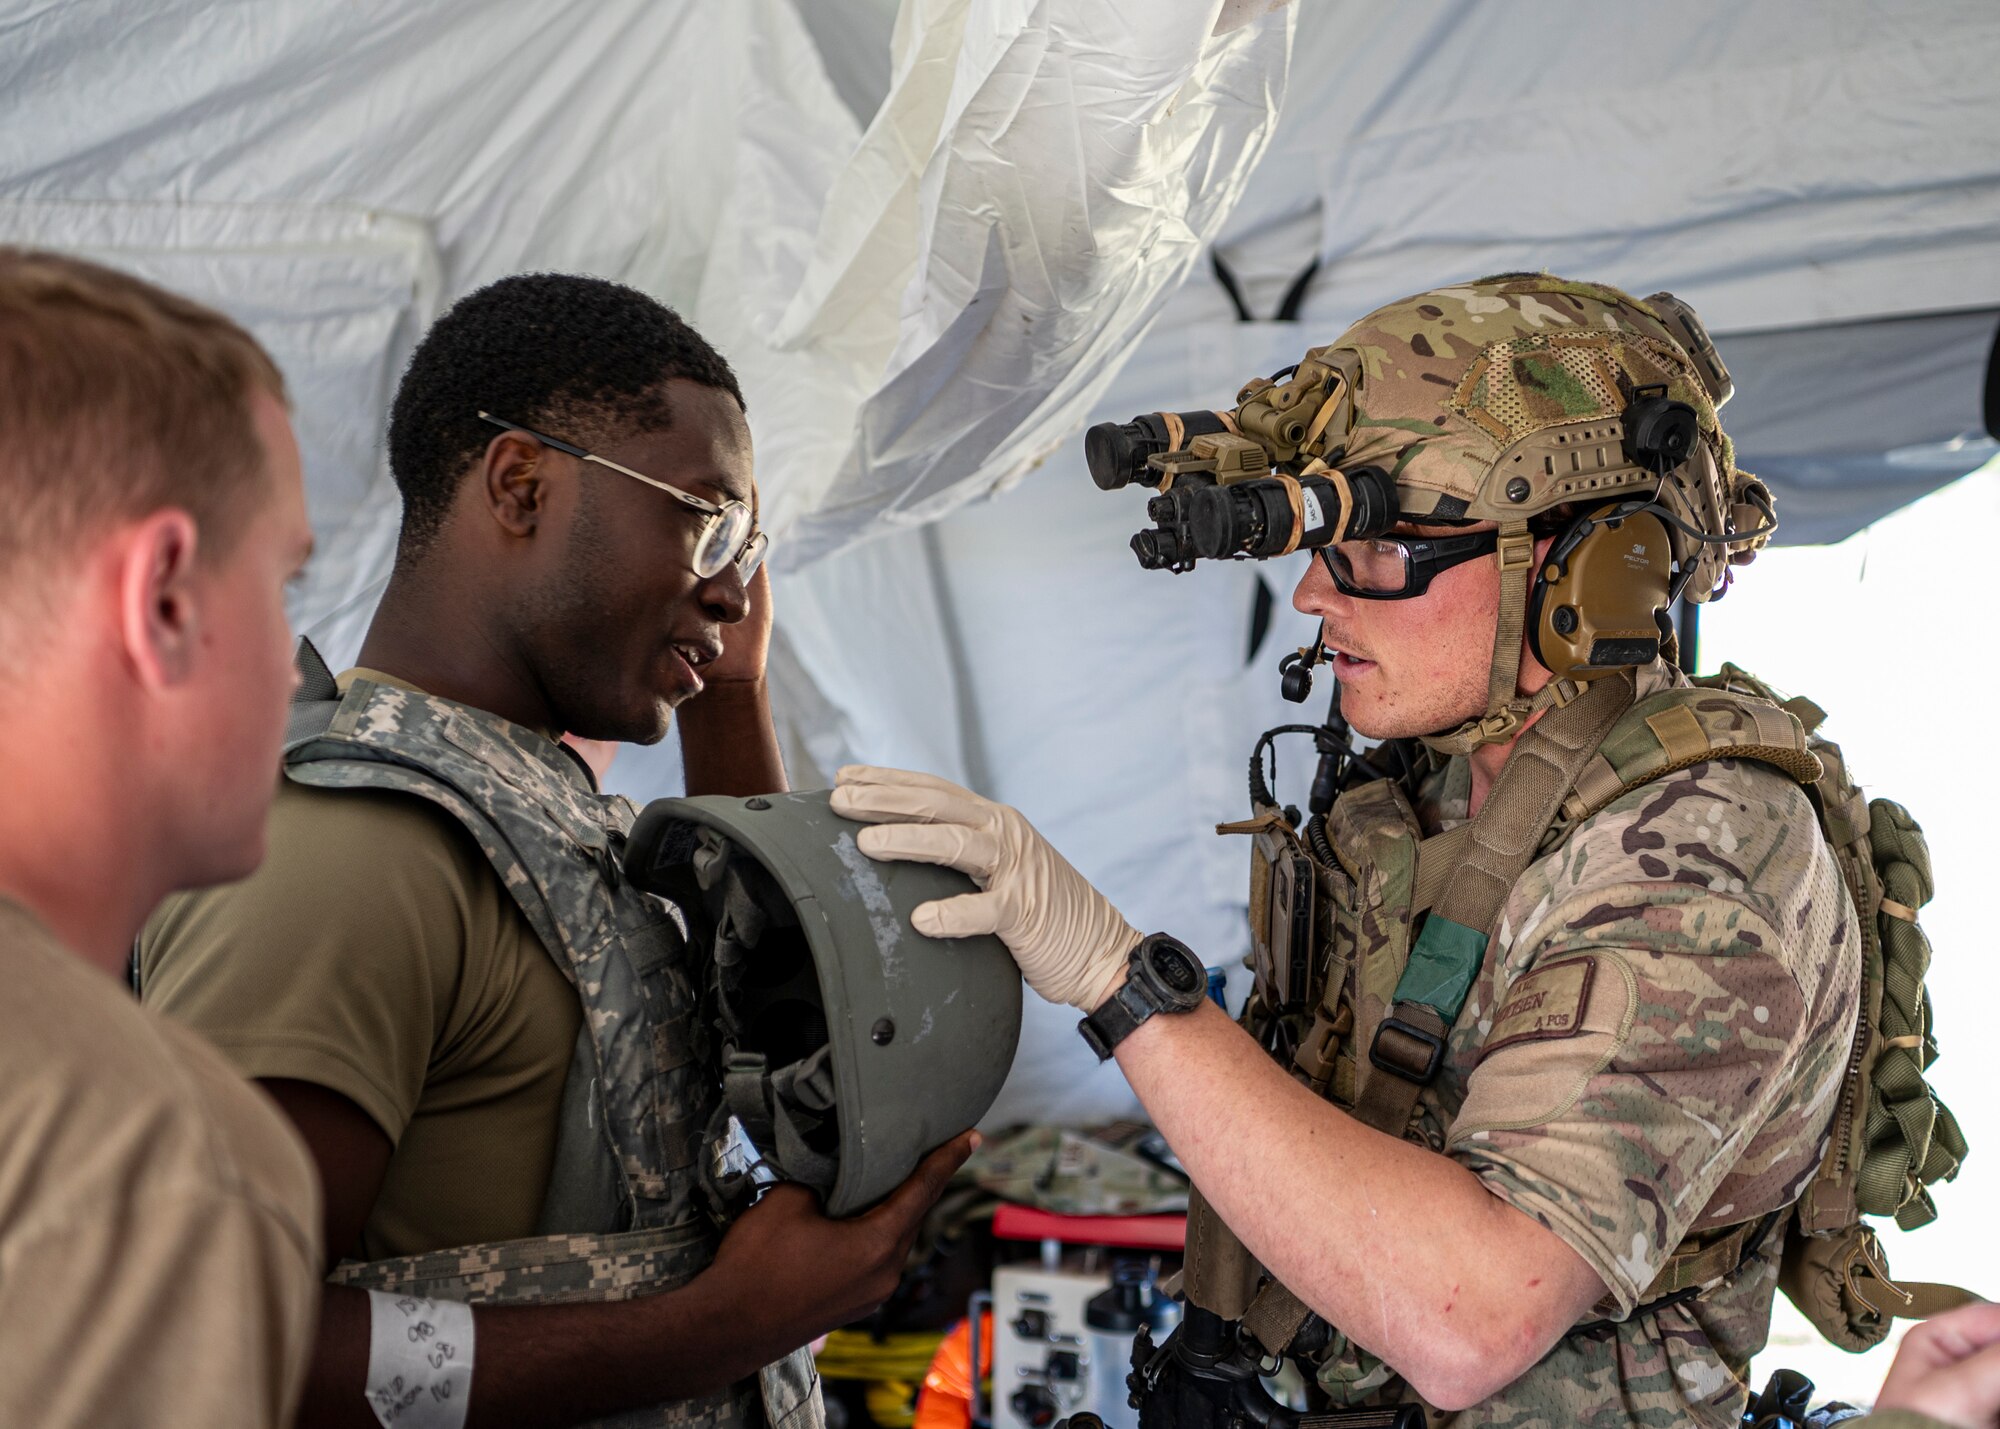 A U.S. Air Force pararescueman assigned to the 38th Rescue Squadron checks on a patient during a simulated mass casualty exercise during Exercise Ready Tiger 24-1 at Avon Park Air Force Range, Florida, April 14, 2024. PJs provide care on the ground as well as in the air fulfilling their motto “so others may live”. Built upon Air Combat Command's directive to assert air power in contested environments, Exercise Ready Tiger 24-1 aims to test and enhance the 23rd Wing’s proficiency in executing Lead Wing and Expeditionary Air Base concepts through Agile Combat Employment and command and control operations. (U.S. Air Force photo by Airman 1st Class Leonid Soubbotine)